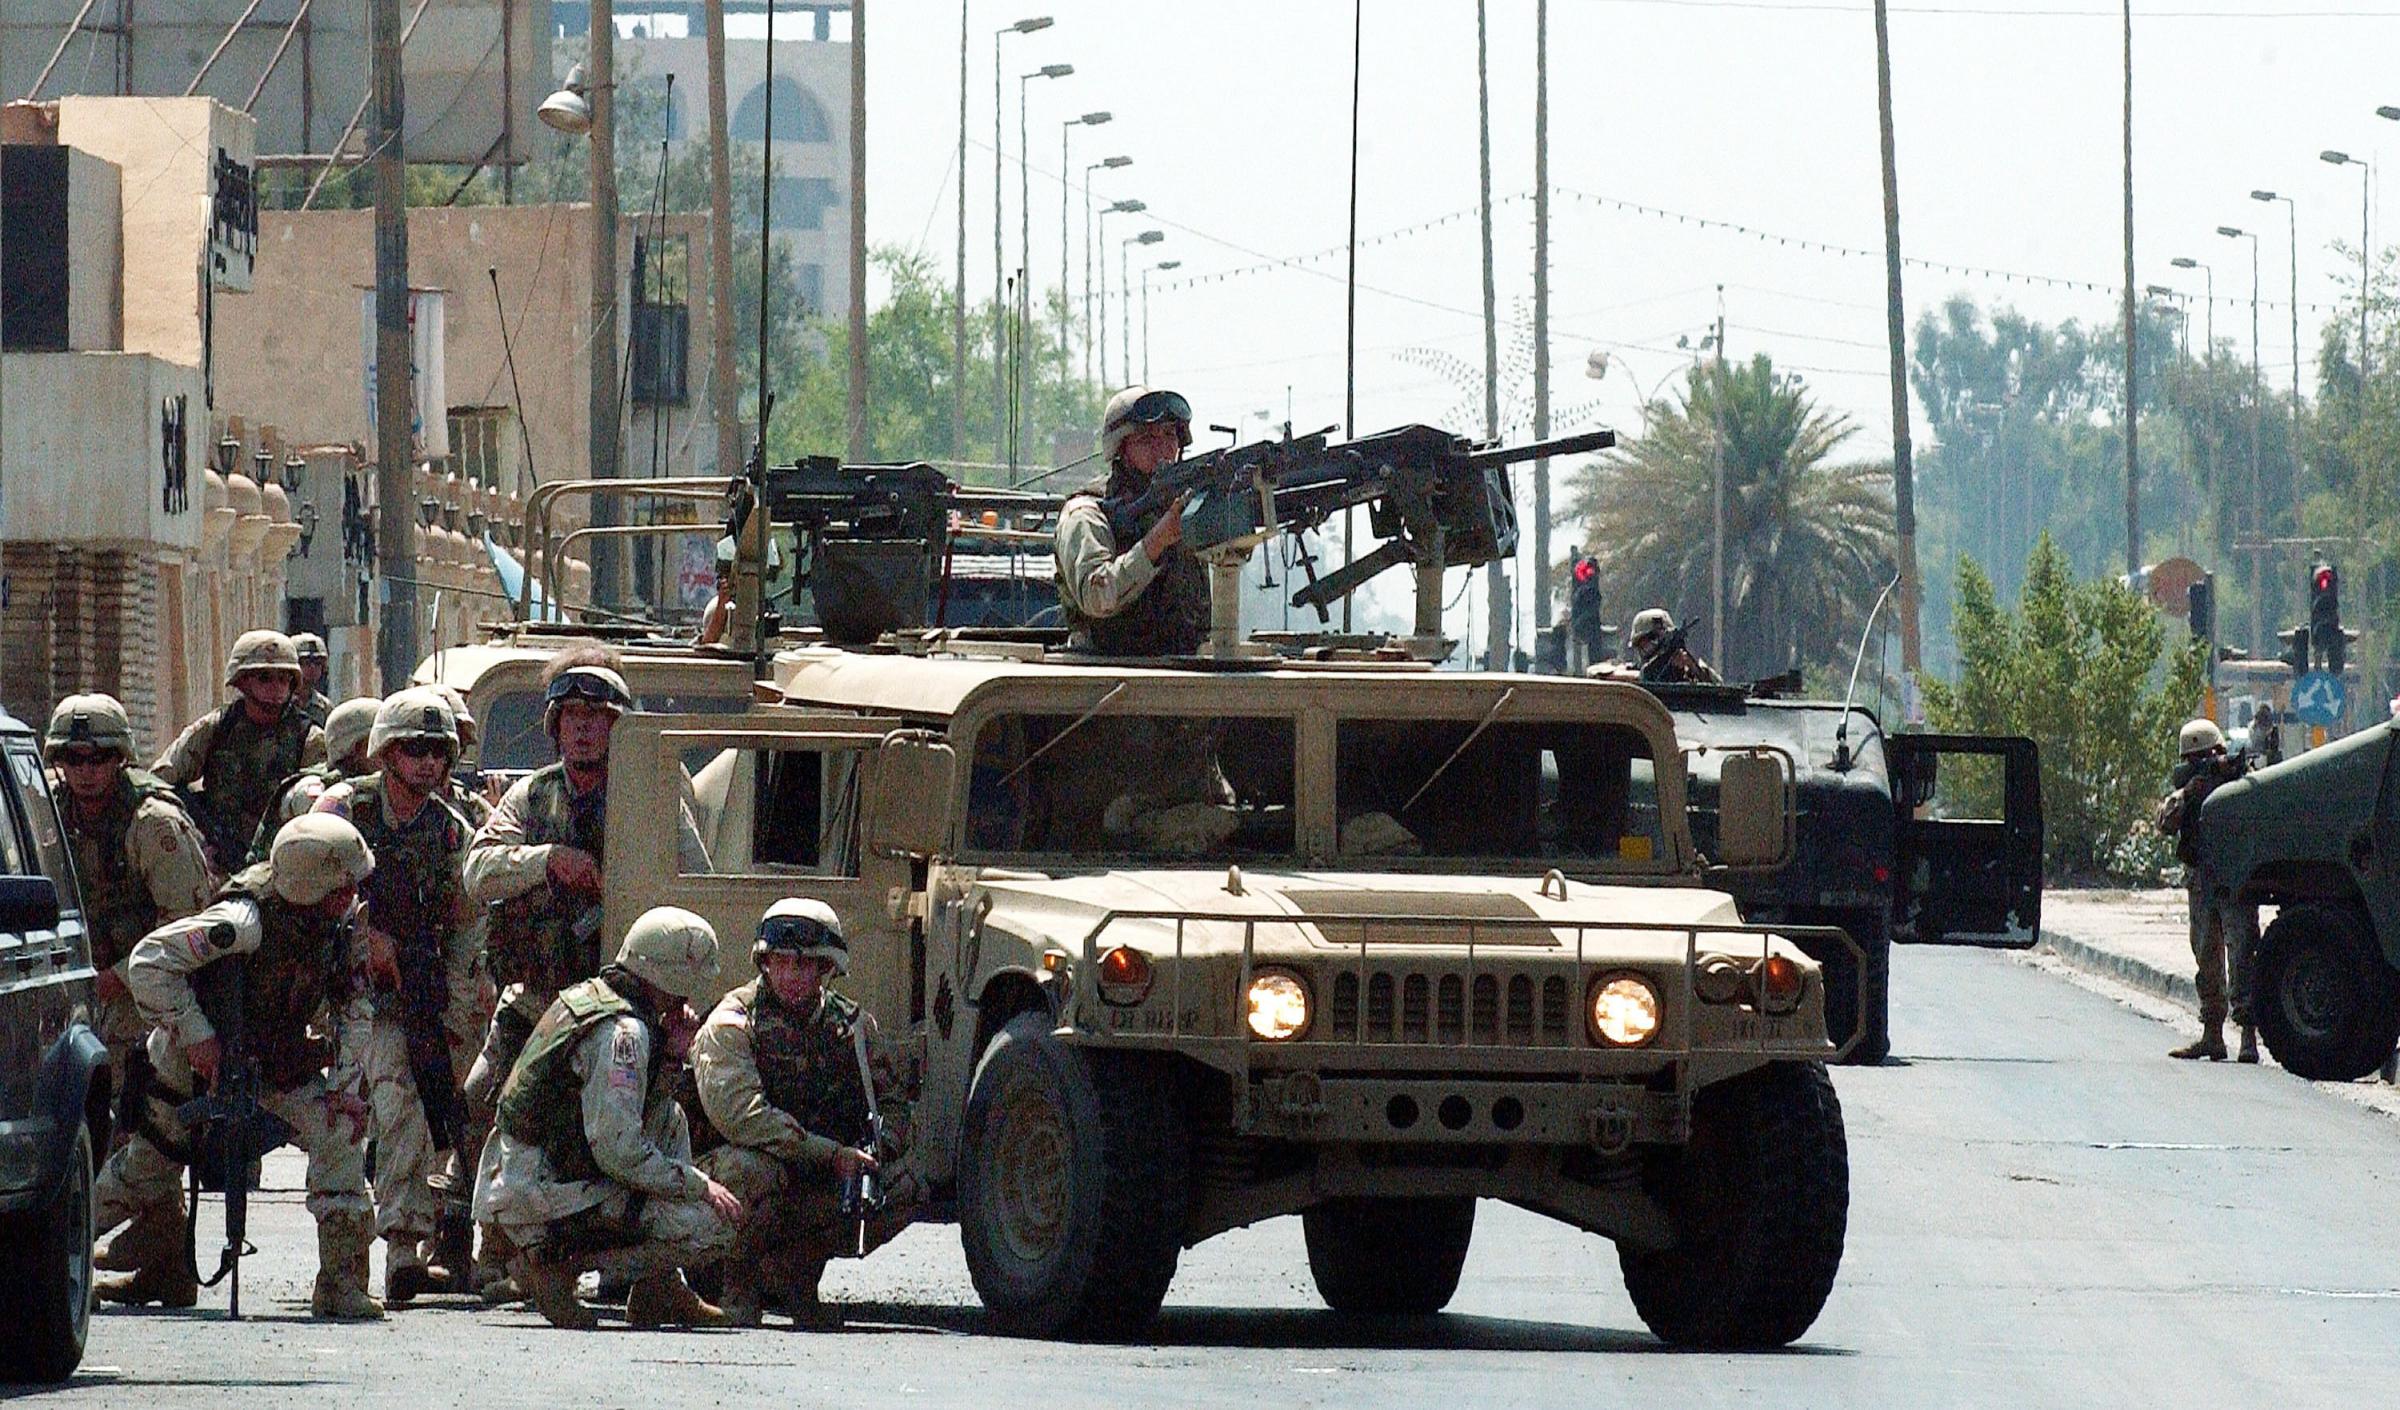 BAGHDAD, IRAQ - AUGUST 7: U.S. Army troops with the 82nd Airborne take cover behind a humvee during a gun battle after a rocket propelled grenade (RPG) attack on U.S. troops August 7, 2003 in dowtown Baghdad, Iraq. At least two U.S. soldiers were